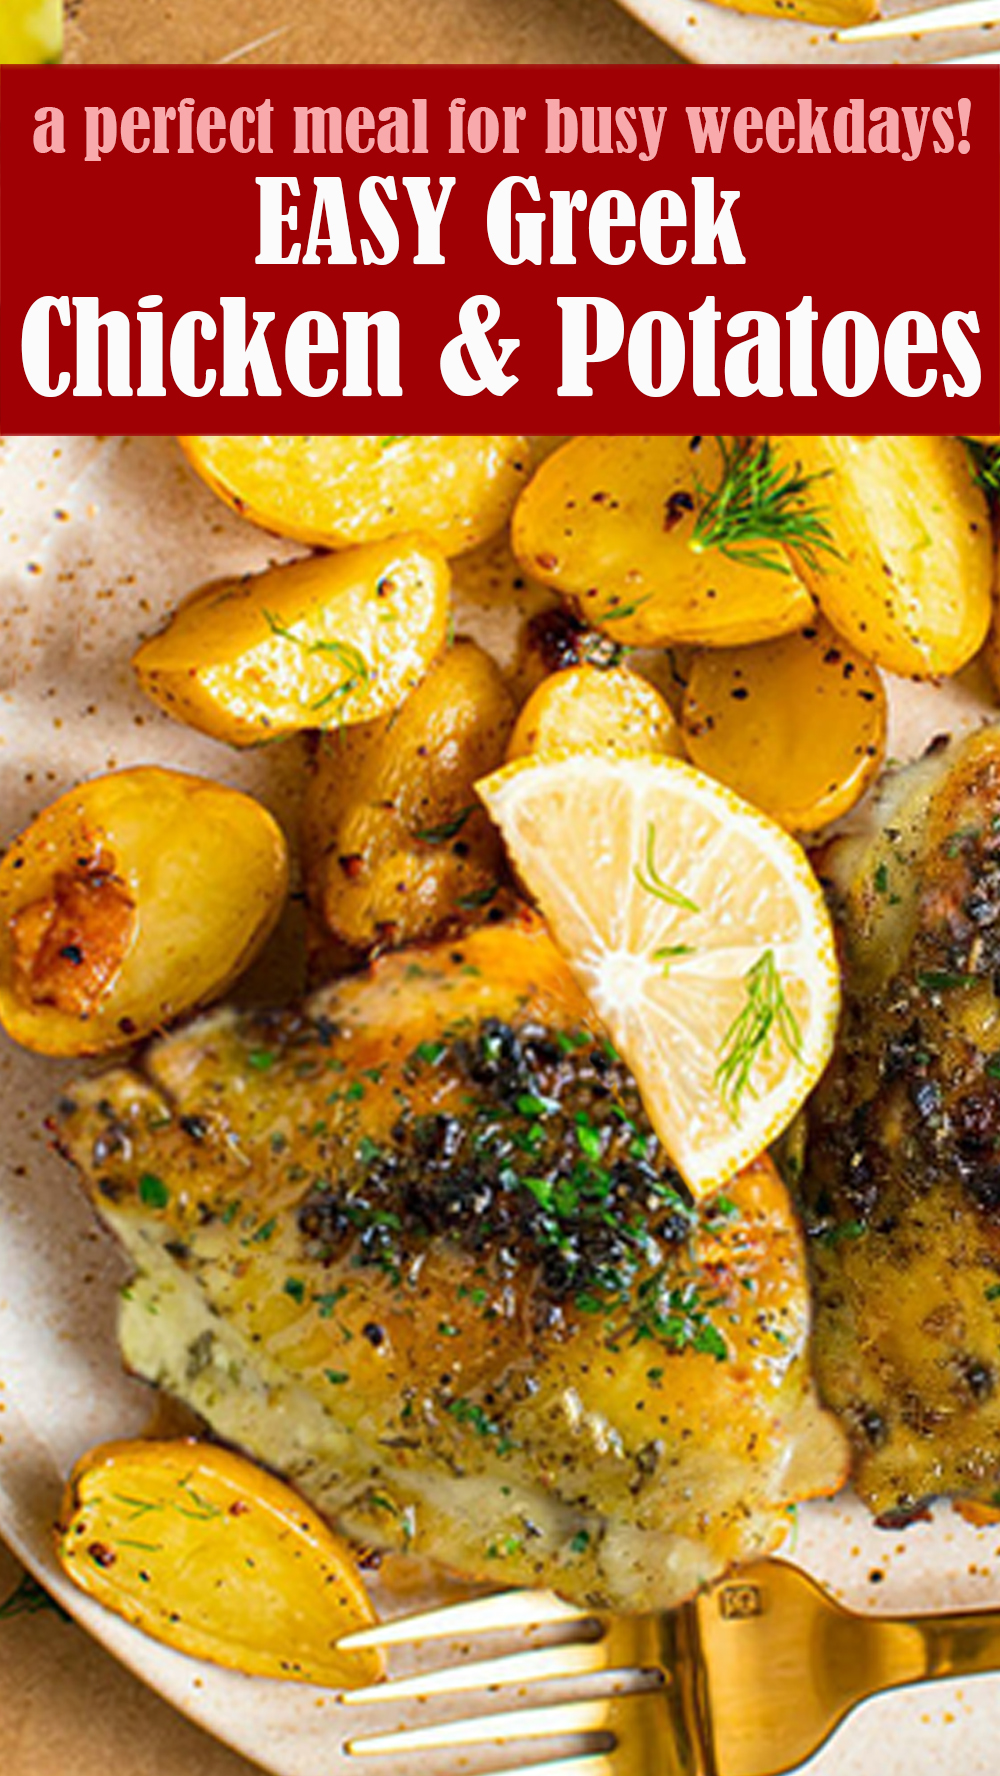 EASY Greek Chicken and Potatoes Recipe